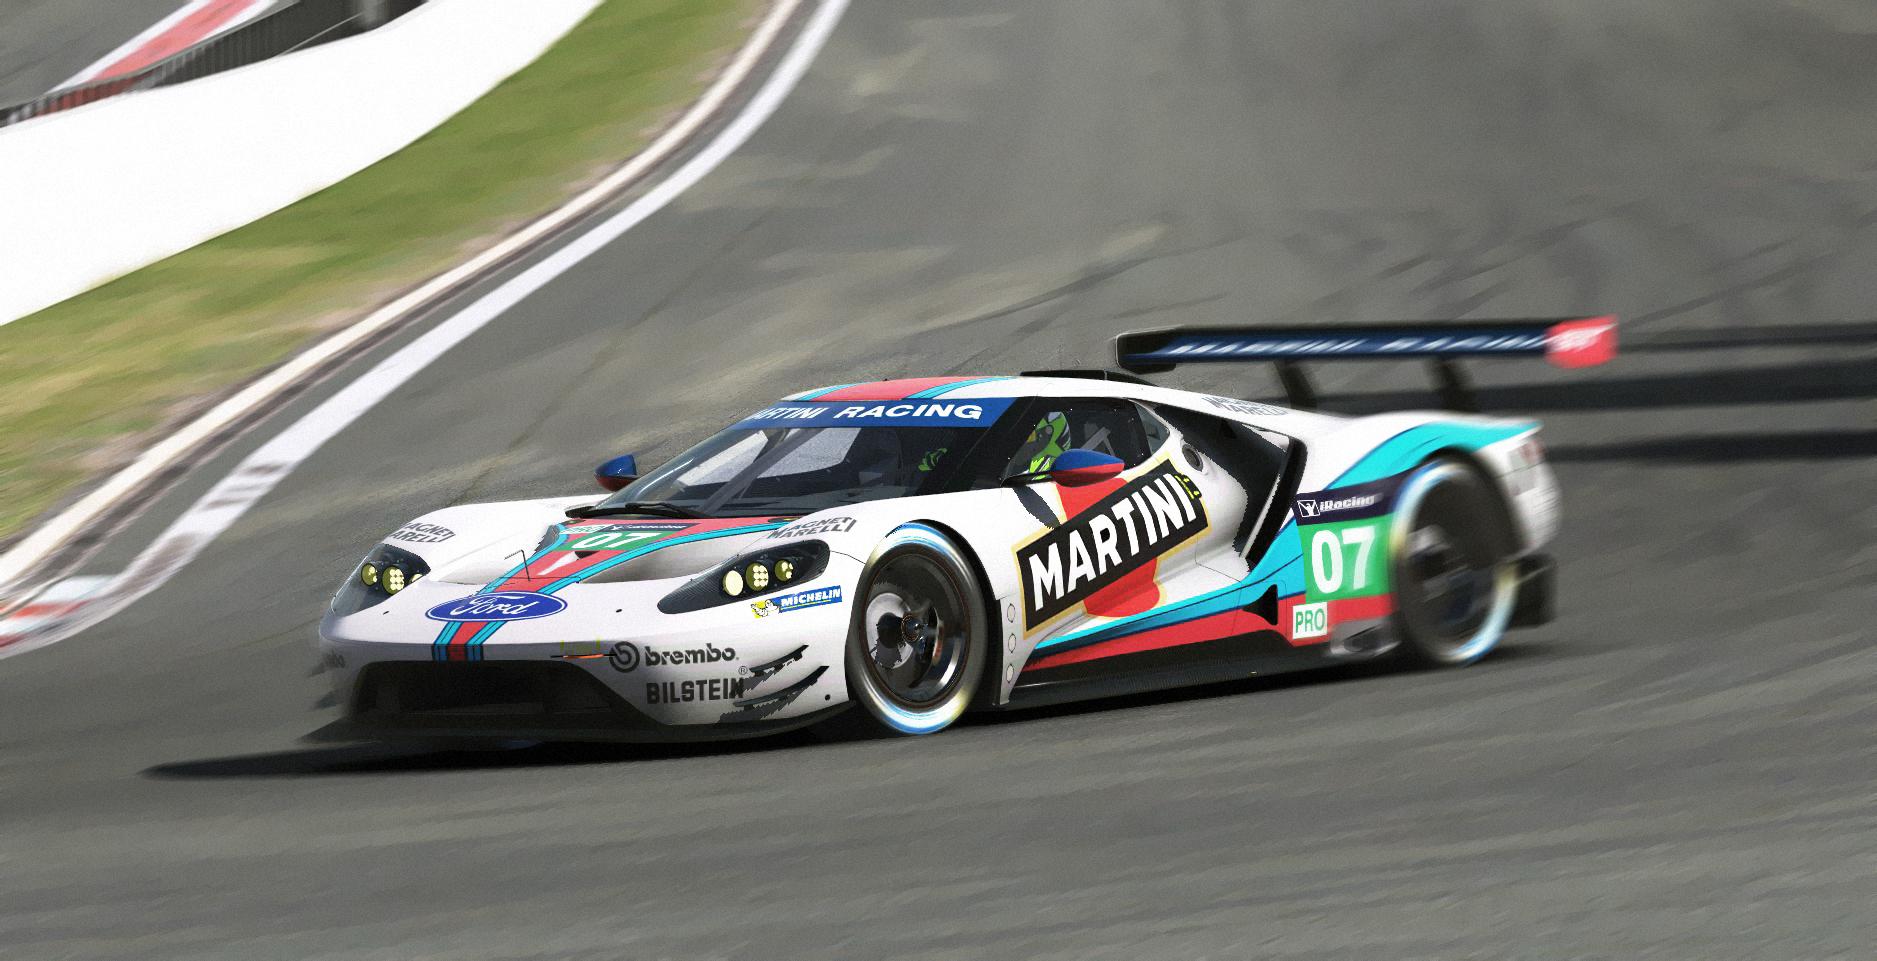 Martini Racing Ford GT 2017 by Dominik Gerardts - Trading Paints